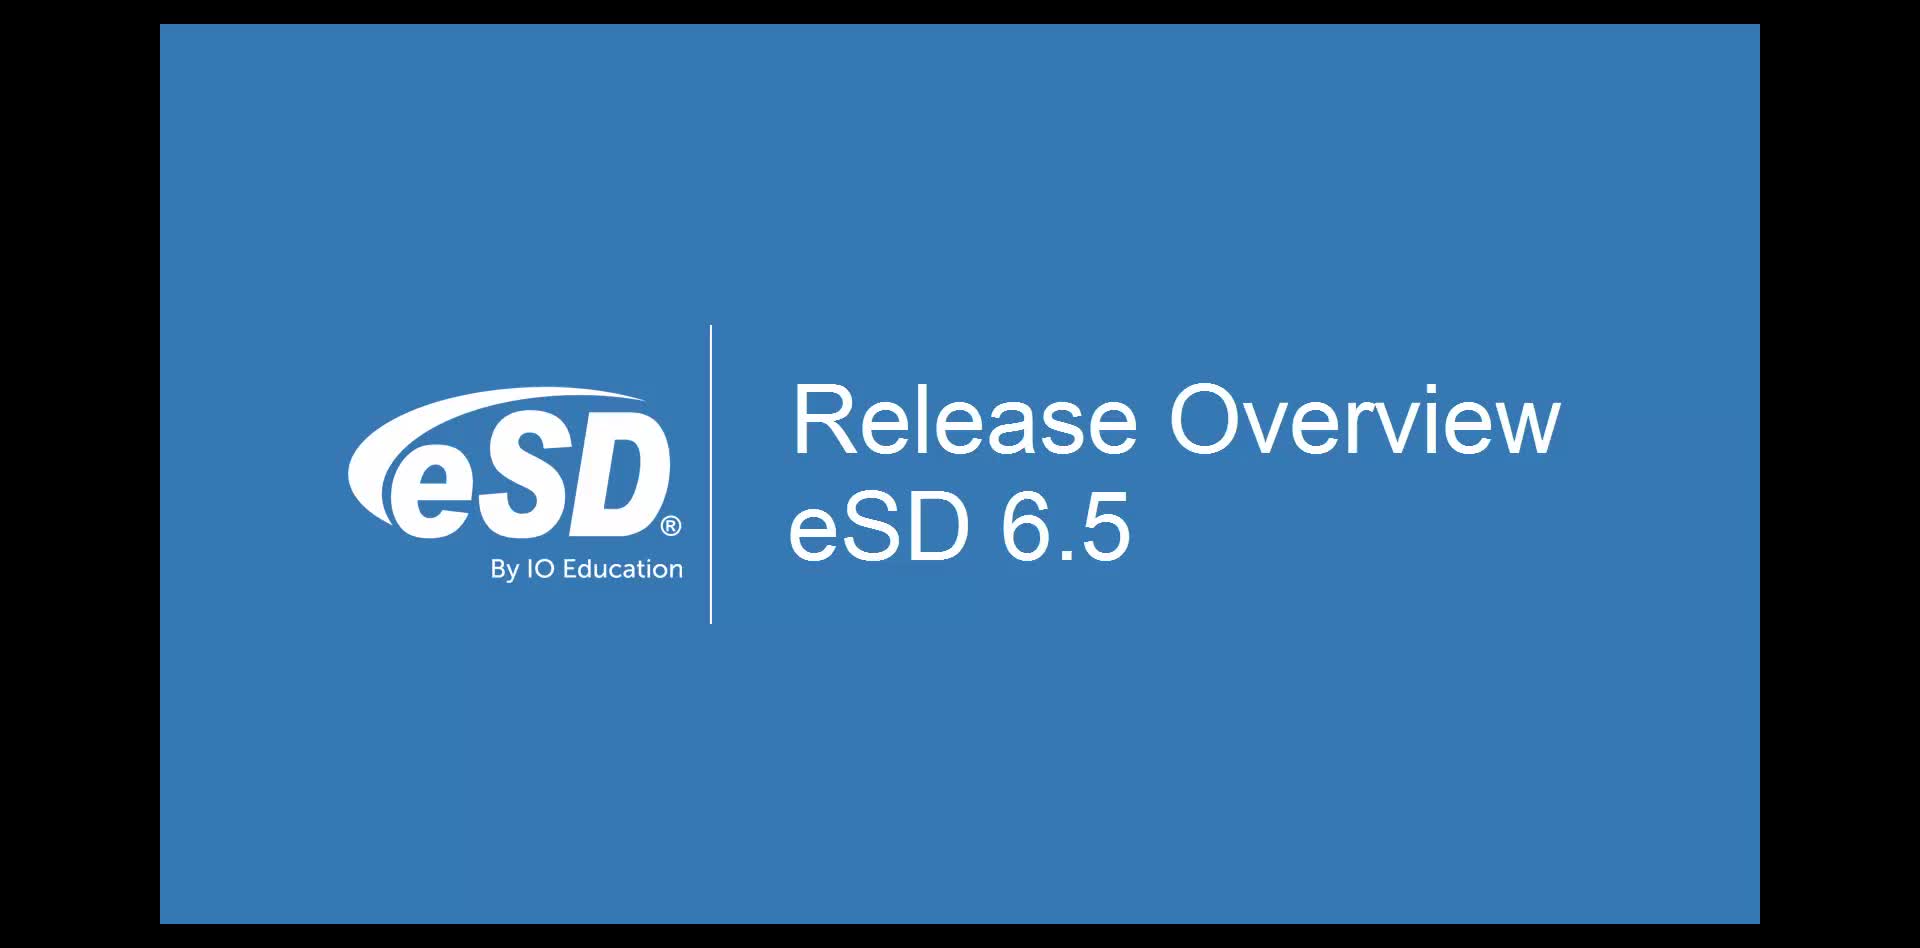 eSD 6.5 Release Overview